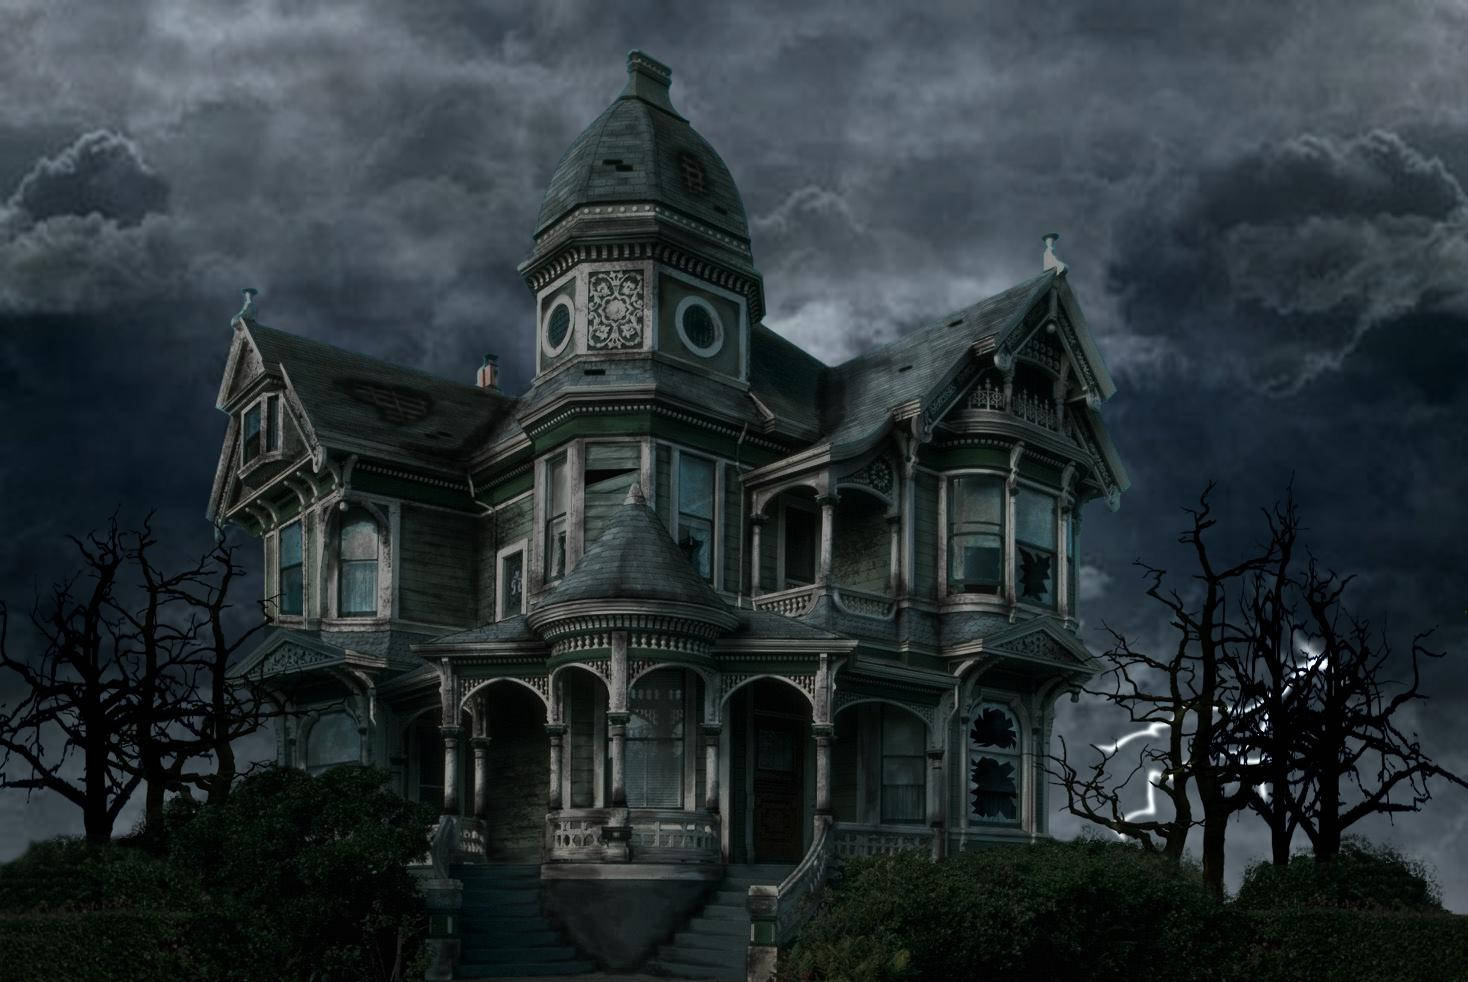 Dare to Visit the Haunted House this Halloween Wallpaper